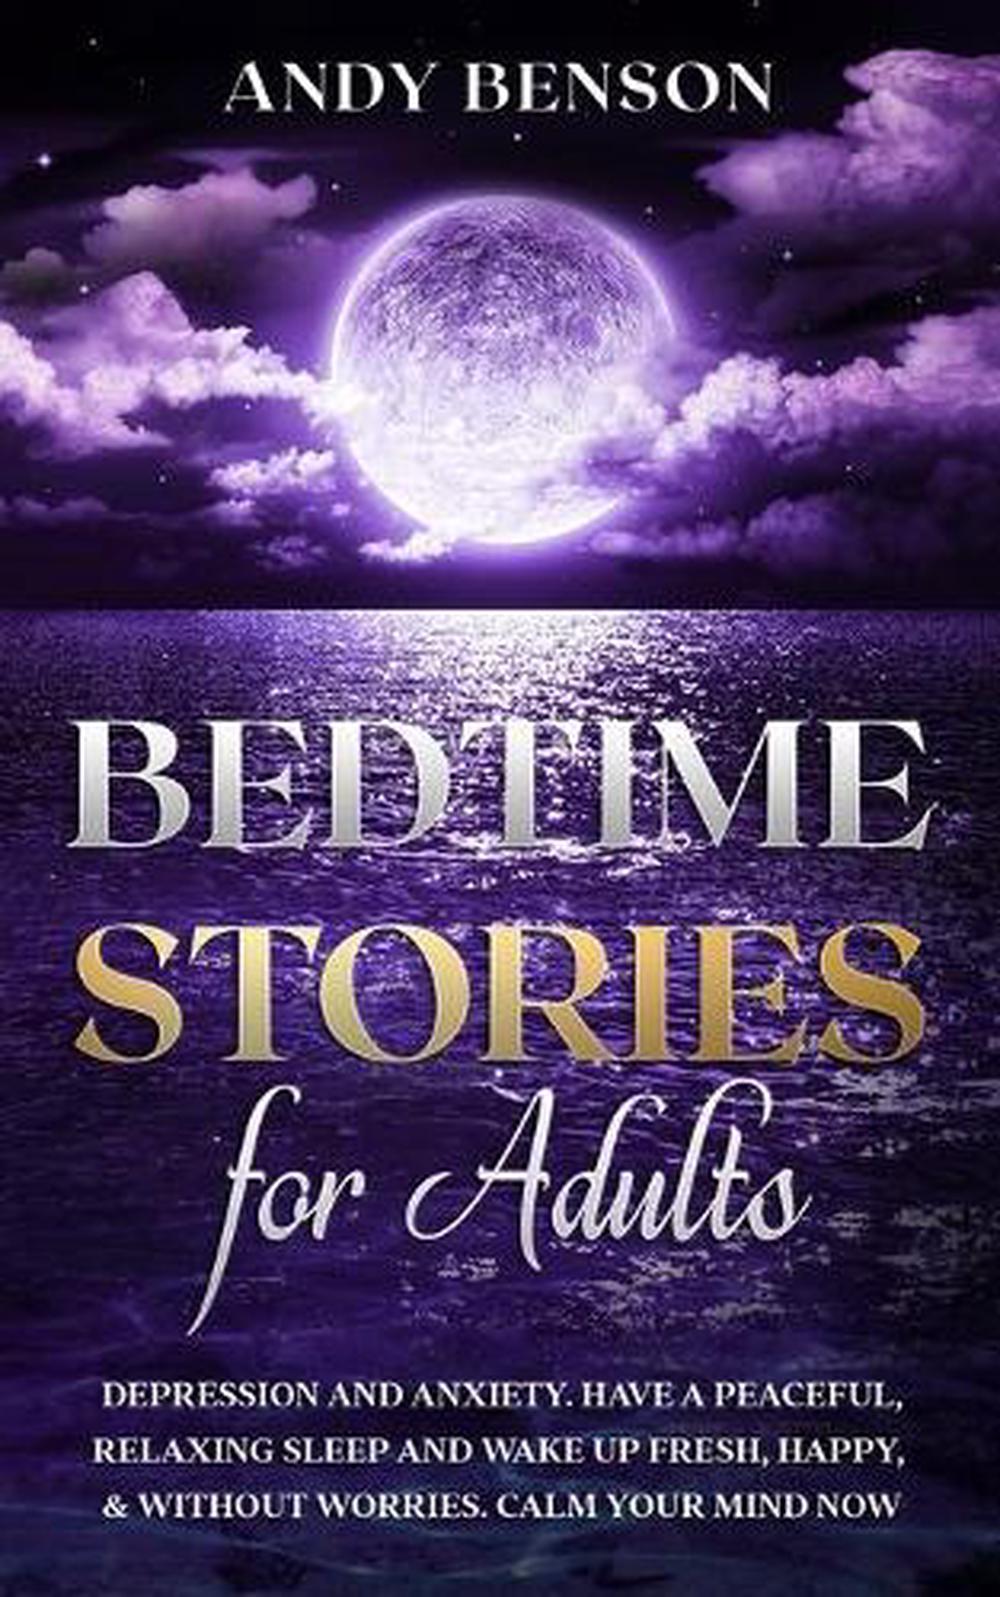 Bedtime Stories For Adults By Andy Benson English Paperback Book Free Shipping 9781914271014